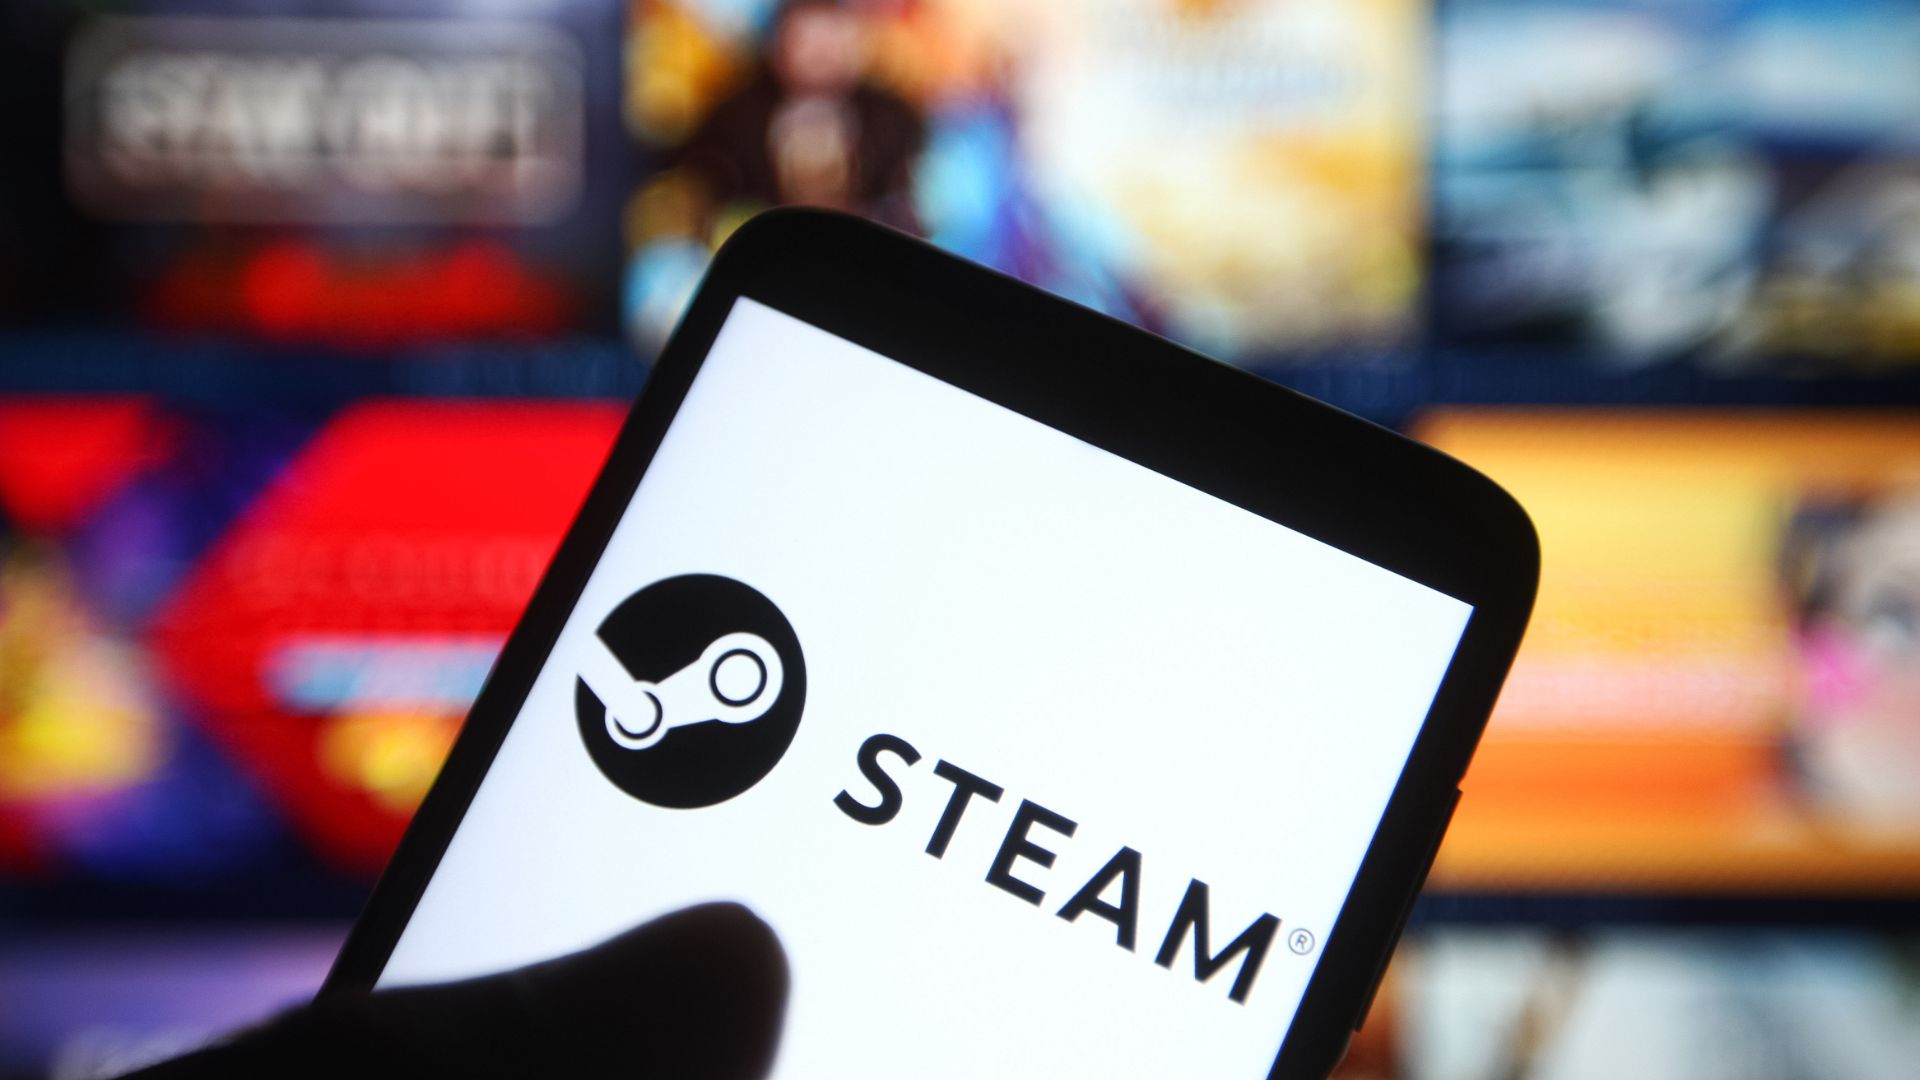 Today we'll take a look at how you can fix Steam Family Sharing not working, so you can keep sharing and enjoying your games with friends and family.